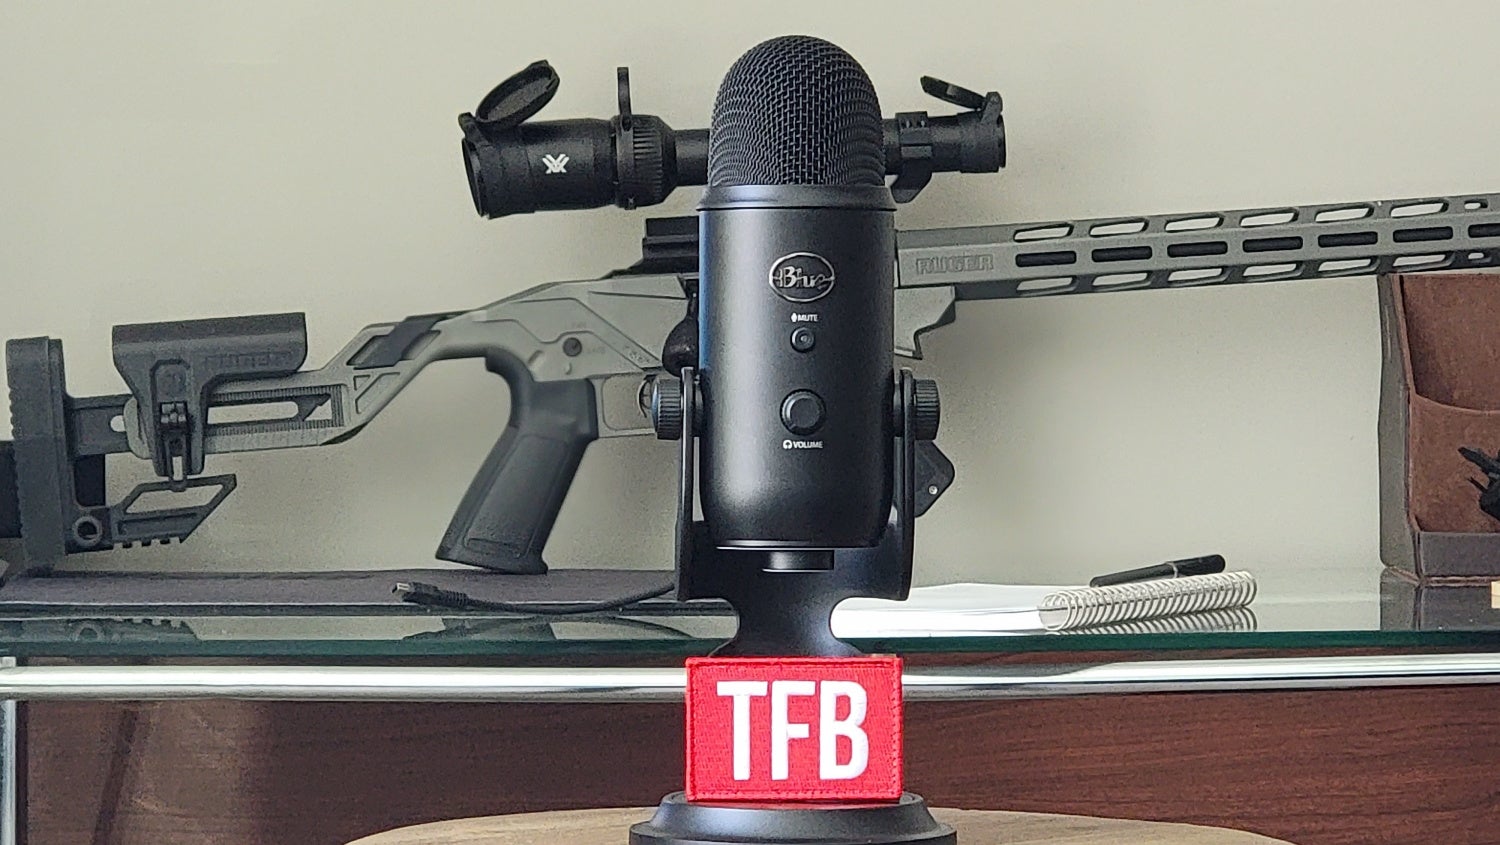 TFB Podcast Roundup 53: Hearing Protection, and Space Cowboys